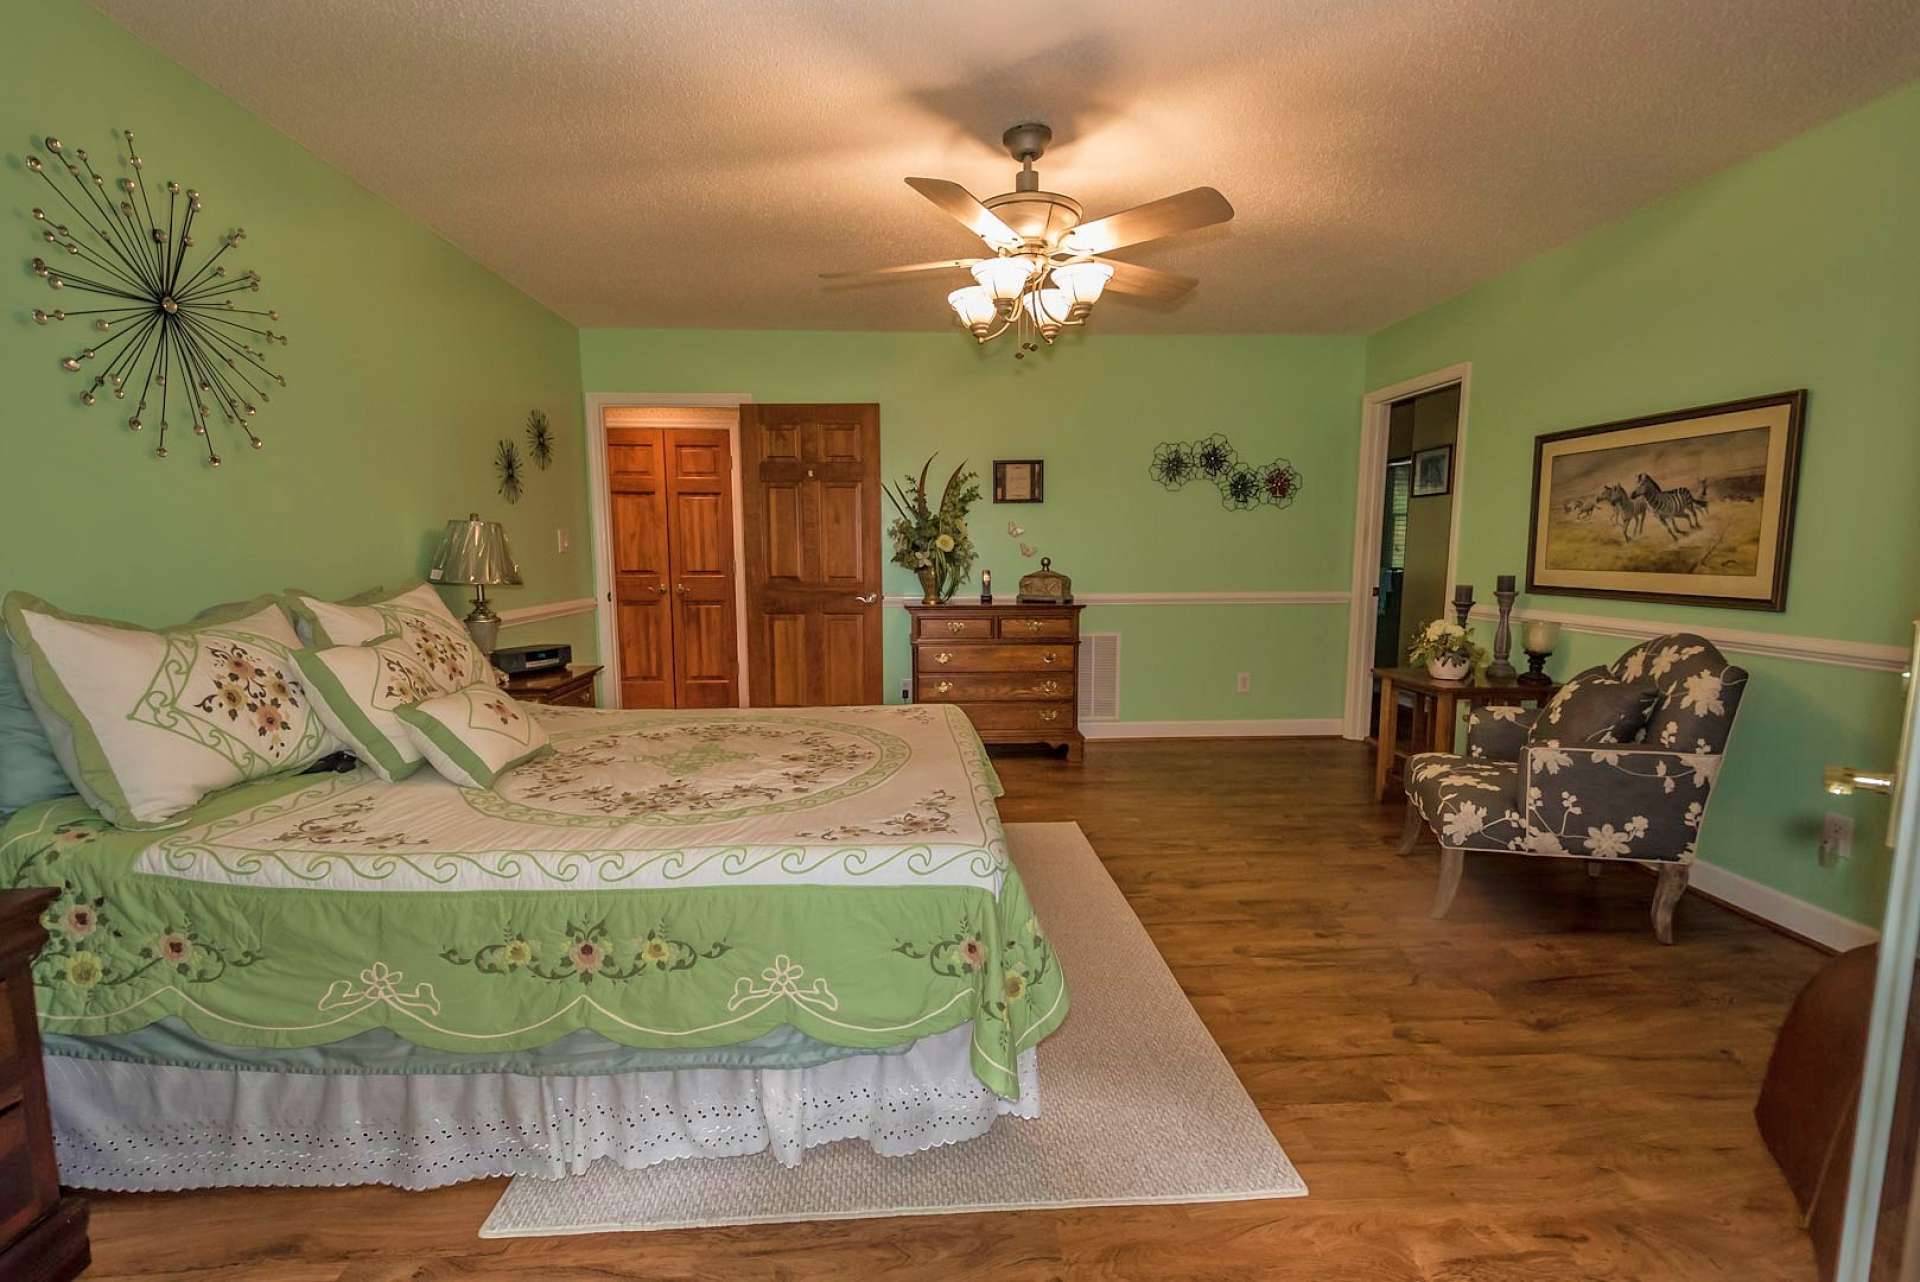 The main level offers two choices for your master suite. This spacious option offers wood floors, walk-in closet, private bath with double vanity, and access to the covered porch.